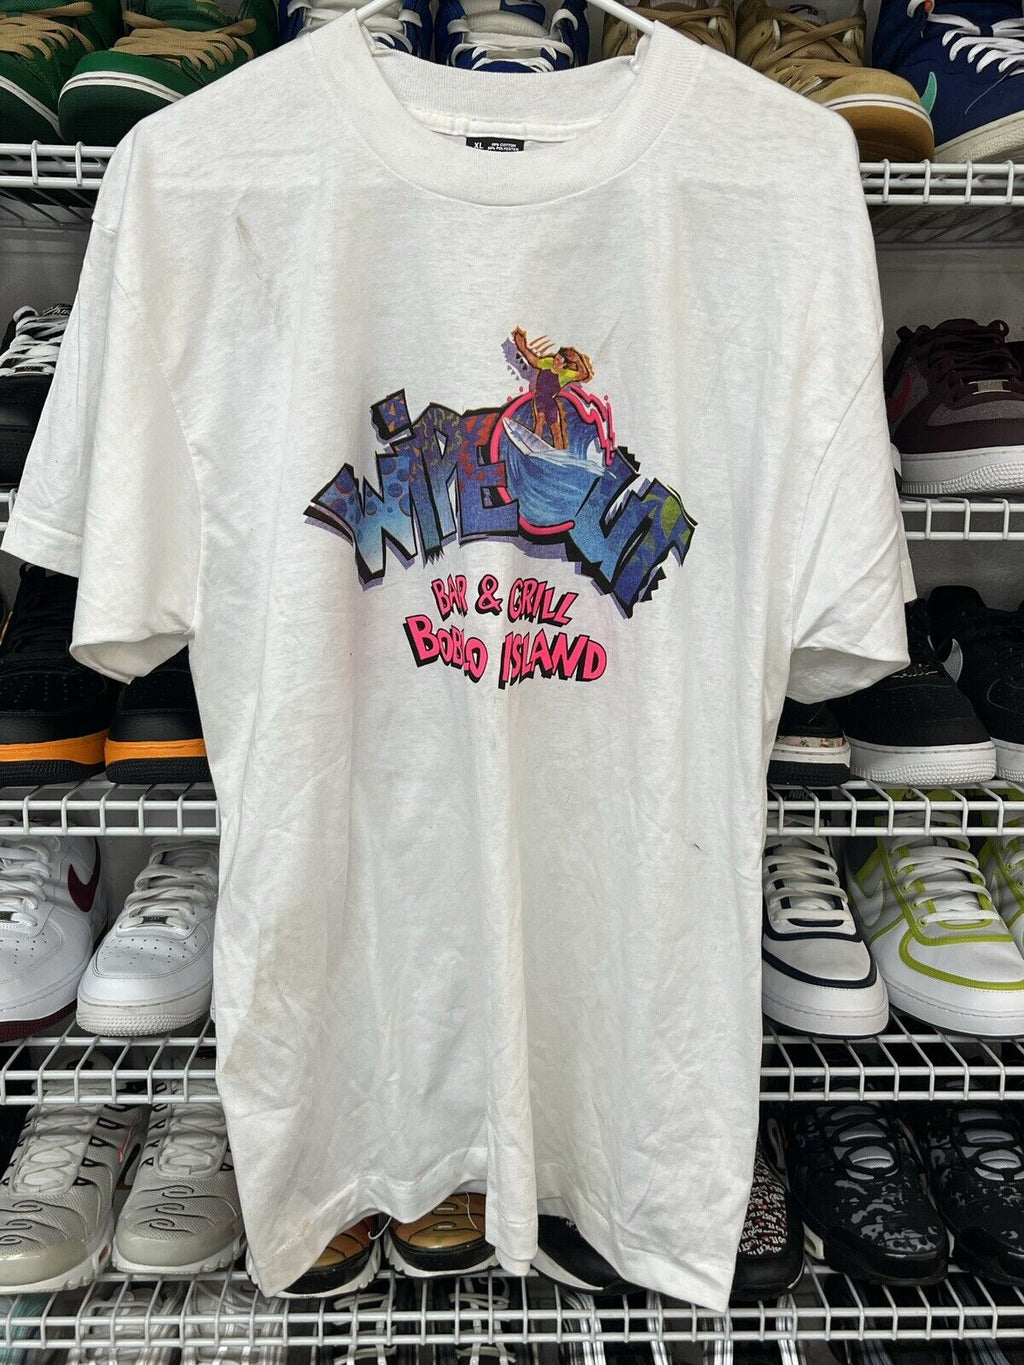 Rare Boblo Island Vintage T Shirt Men's Size XL wipe out bar and grill - Hype Stew Sneakers Detroit